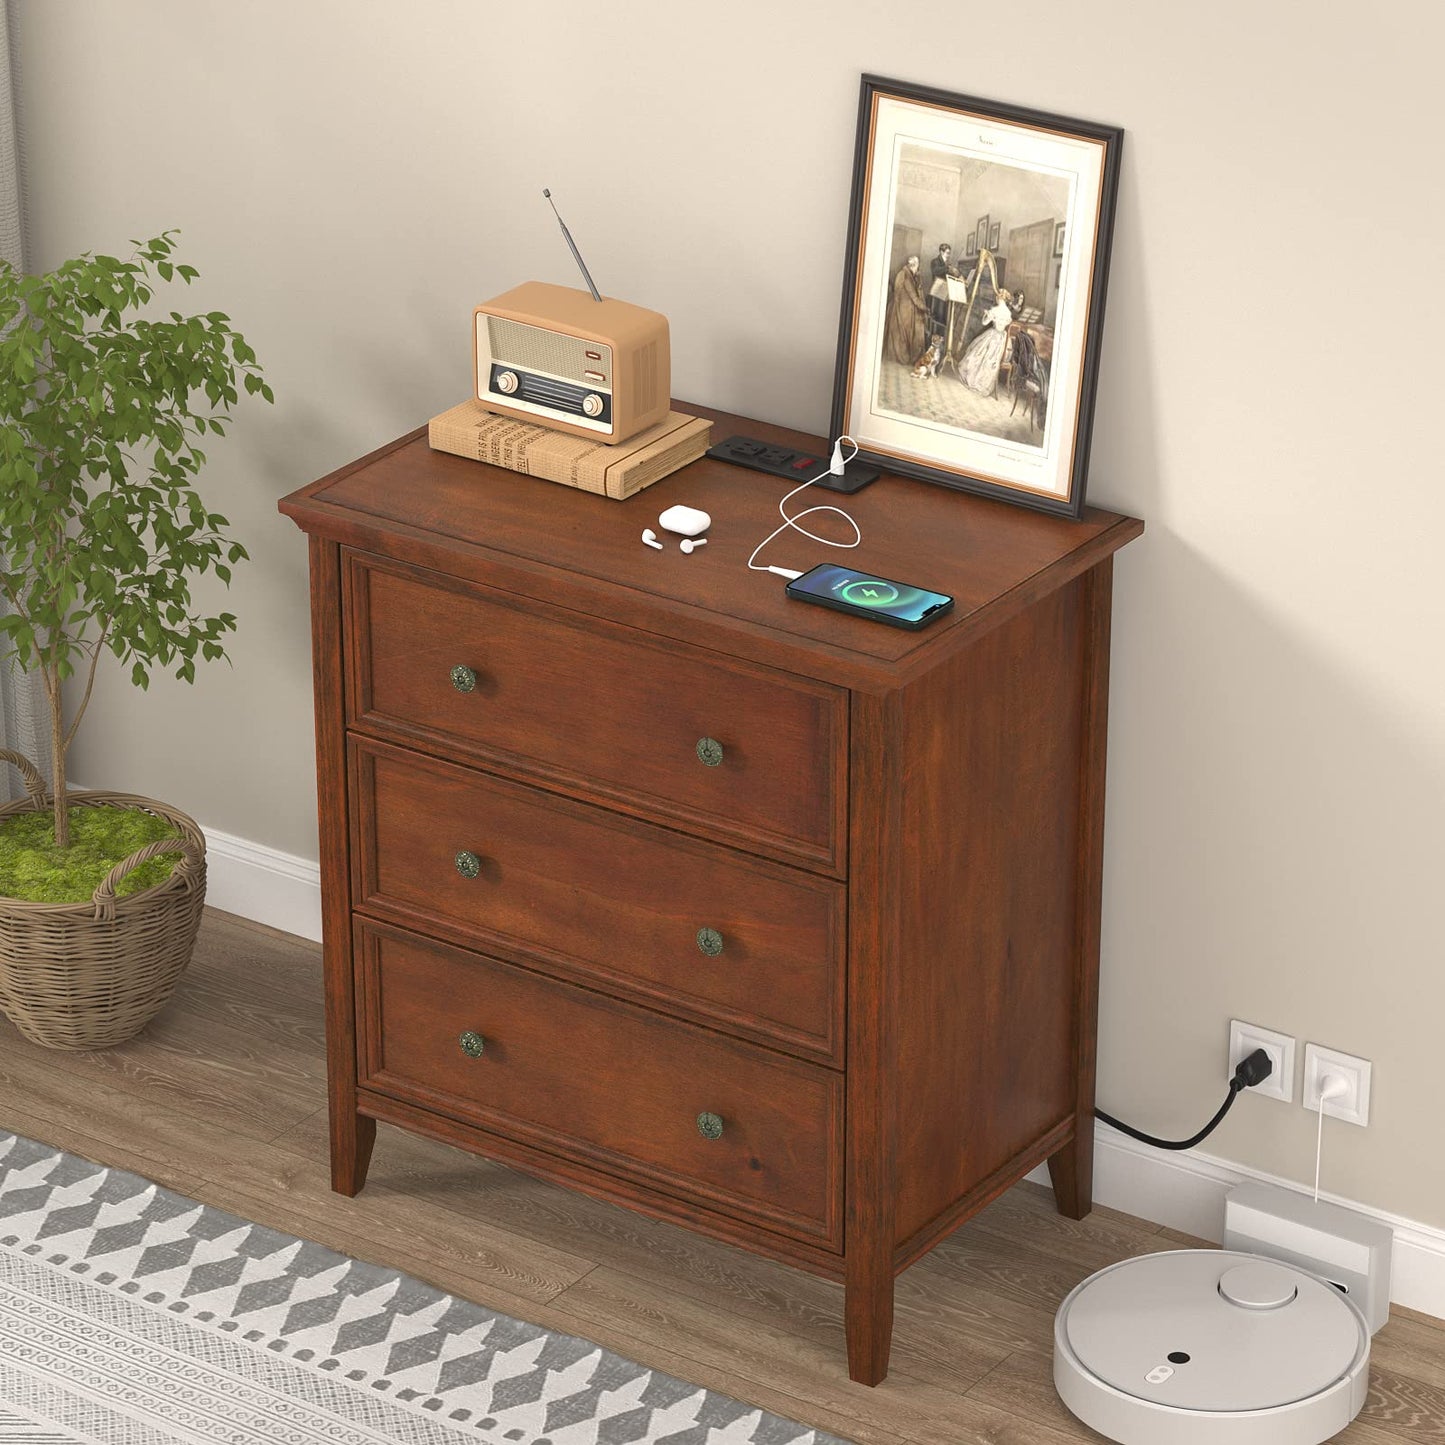 IKENO Nightstand with 3 Drawers and Charging Station, Solid Wood Nightstand Organizer for Bedroom